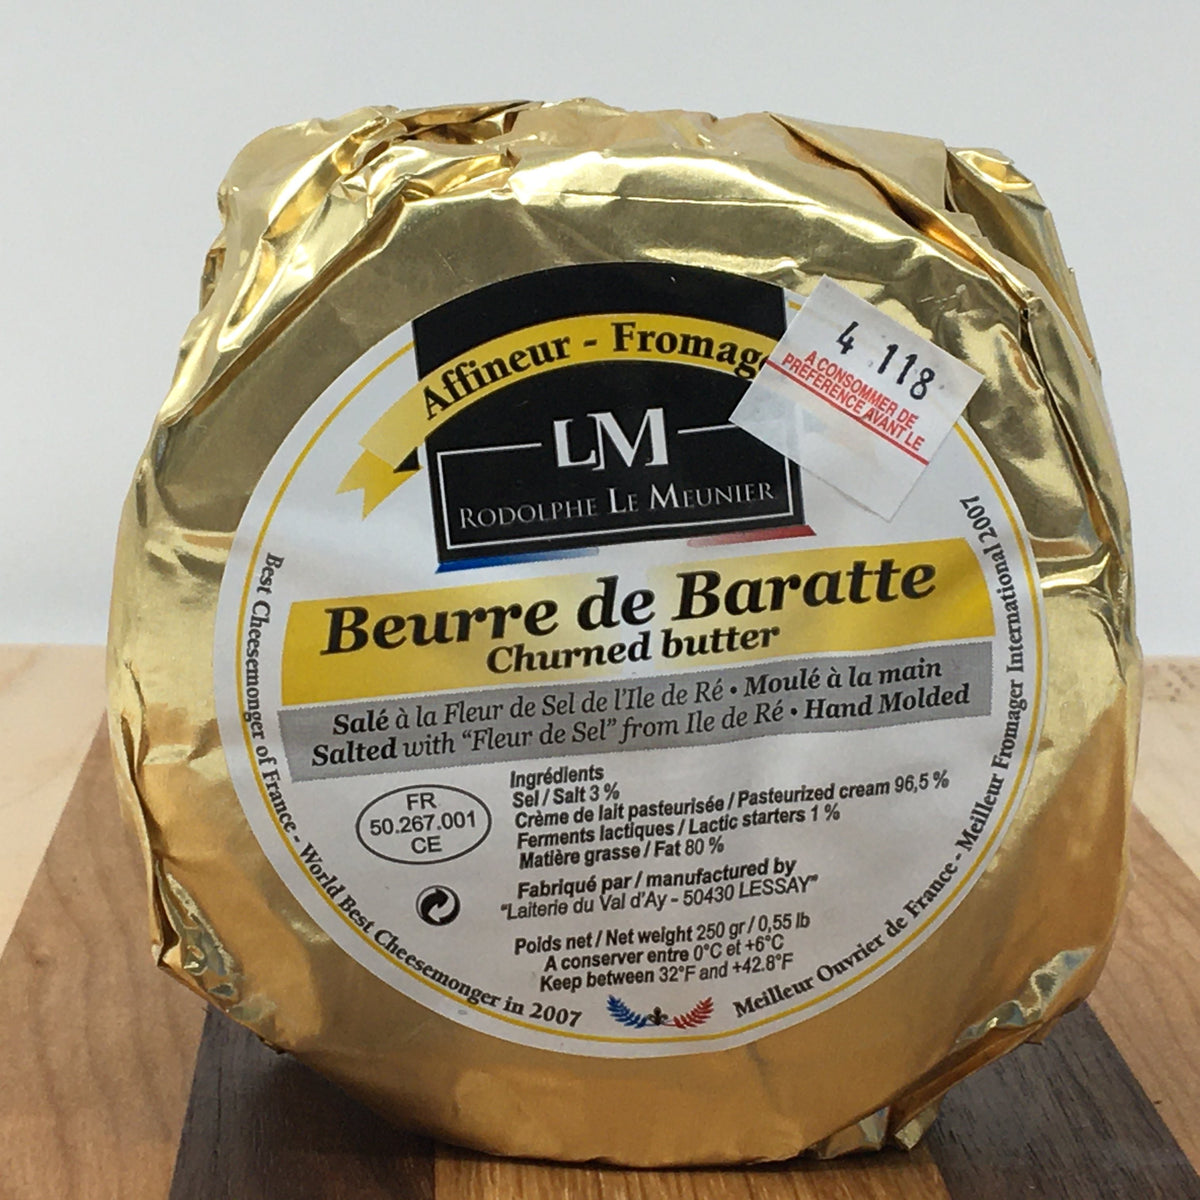 Beurre D'Isigny Salted Butter, 8.8 oz